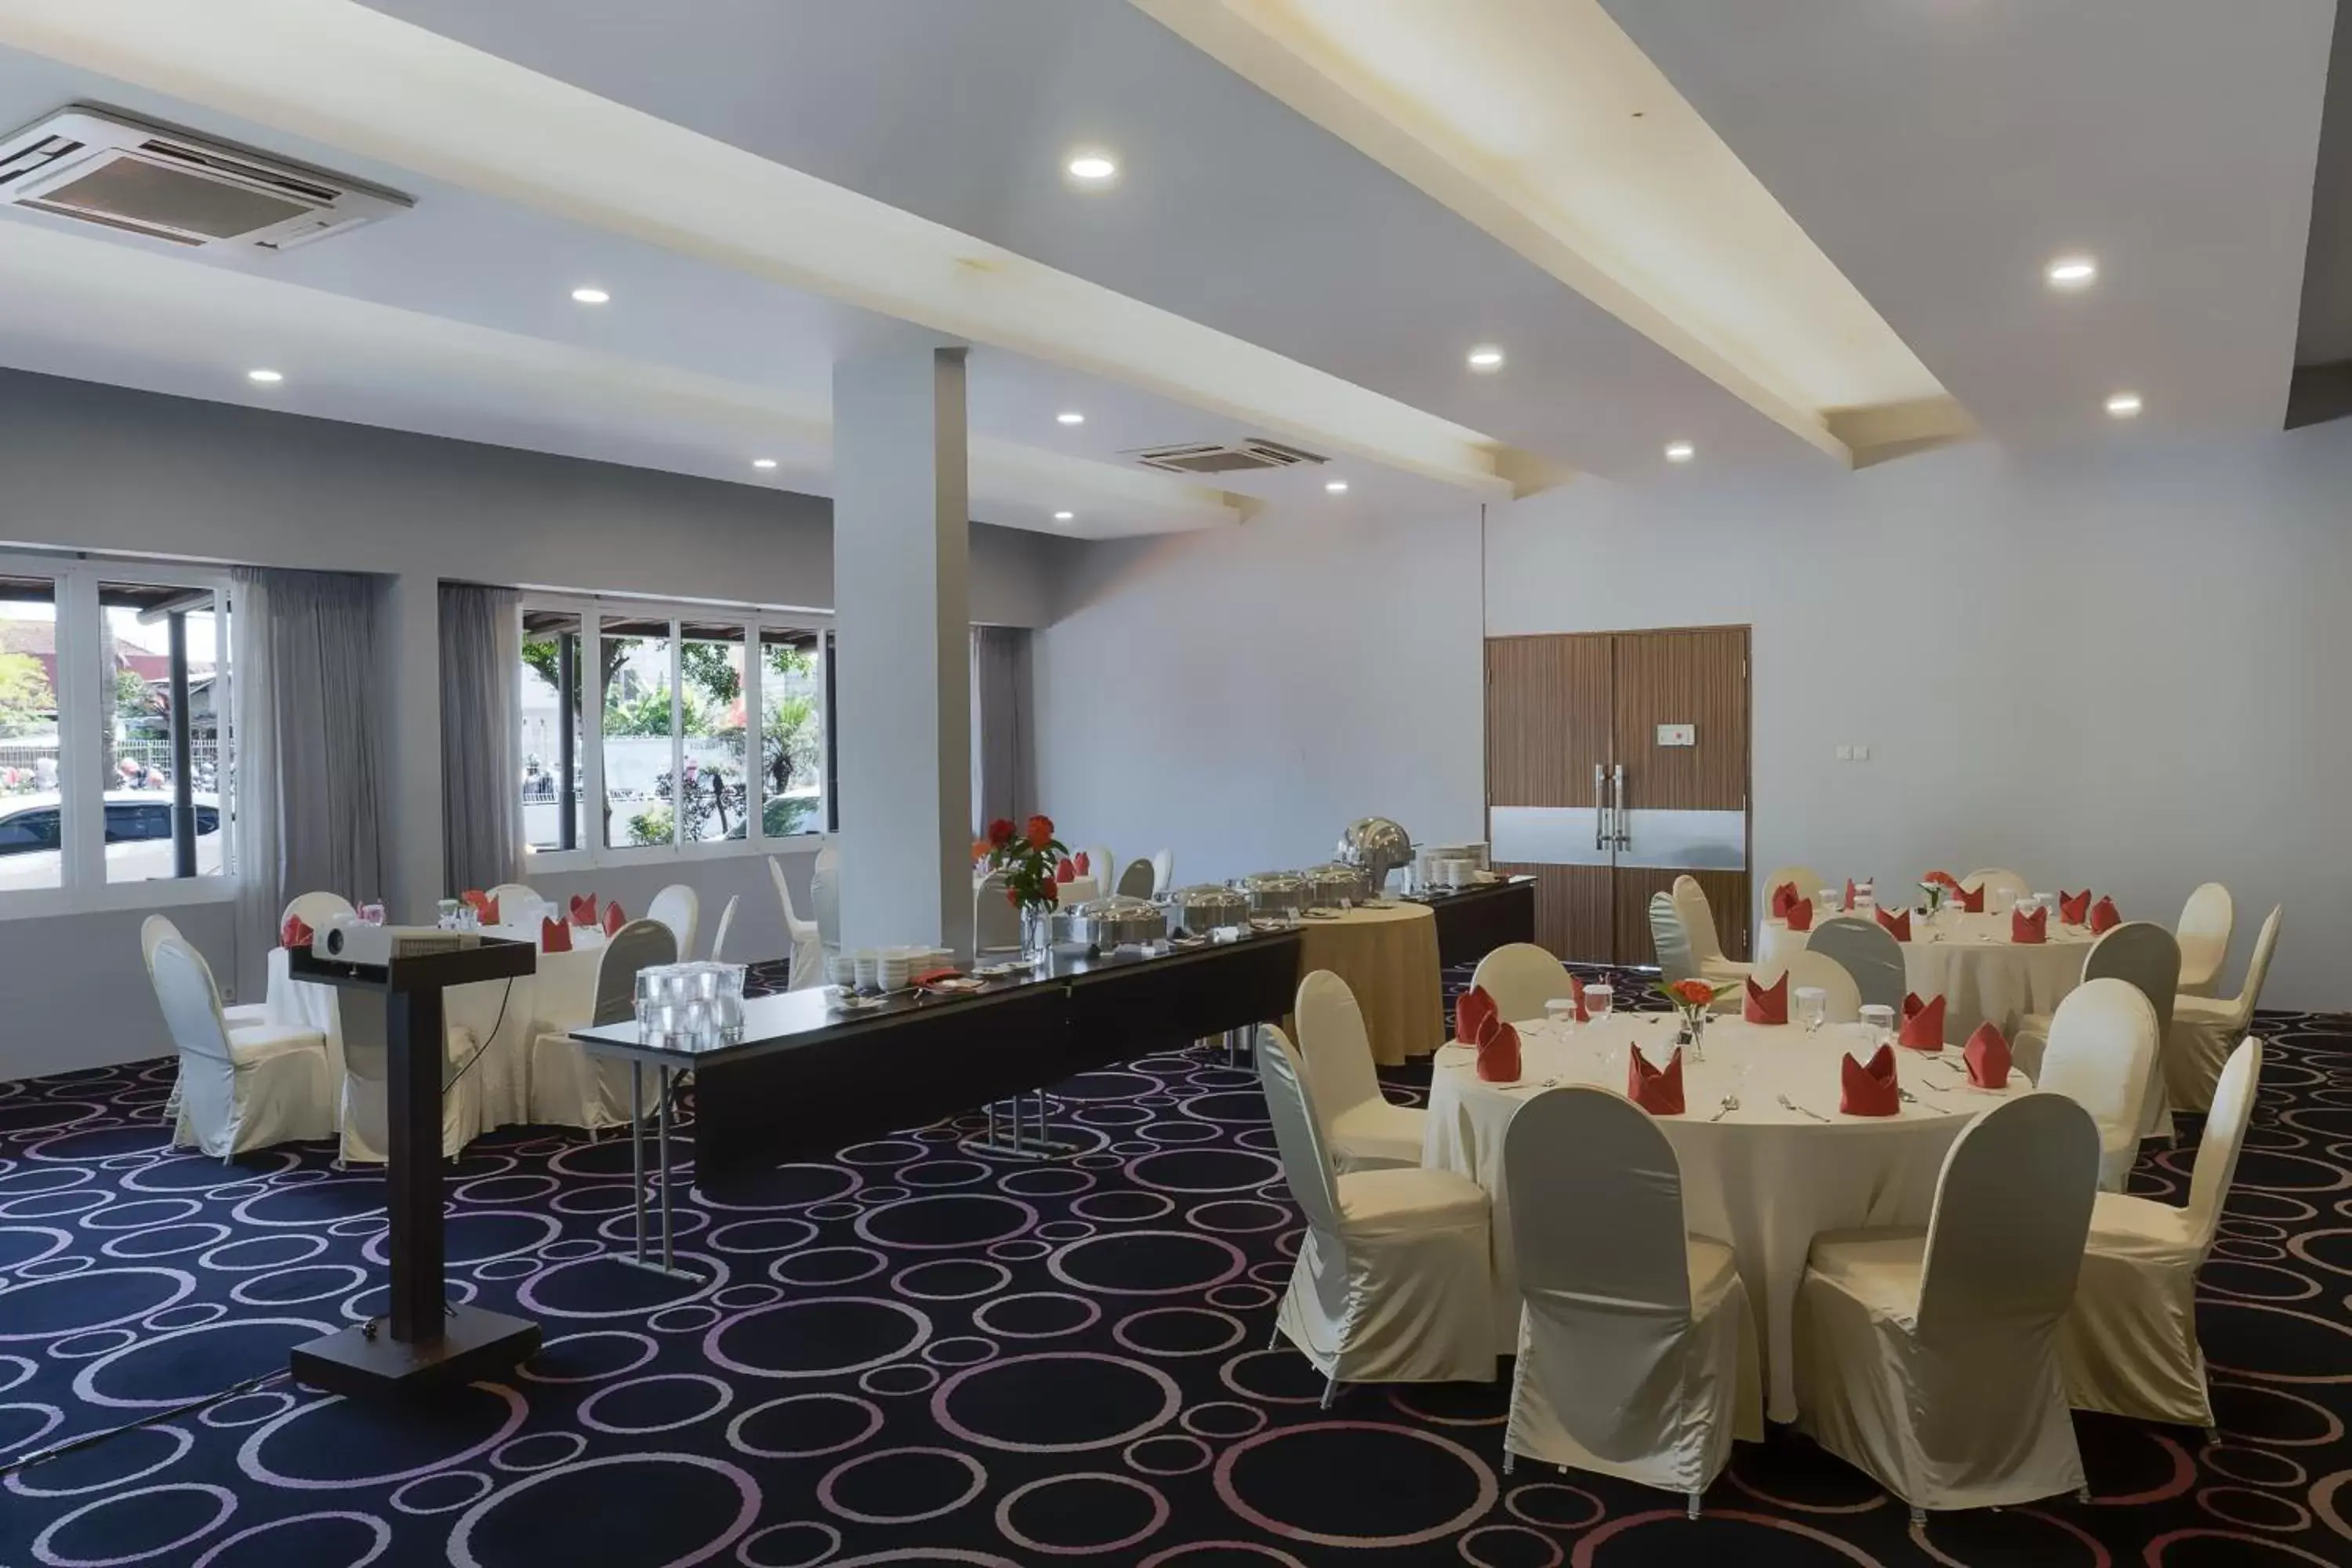 Meeting/conference room, Banquet Facilities in Solaris Hotel Malang